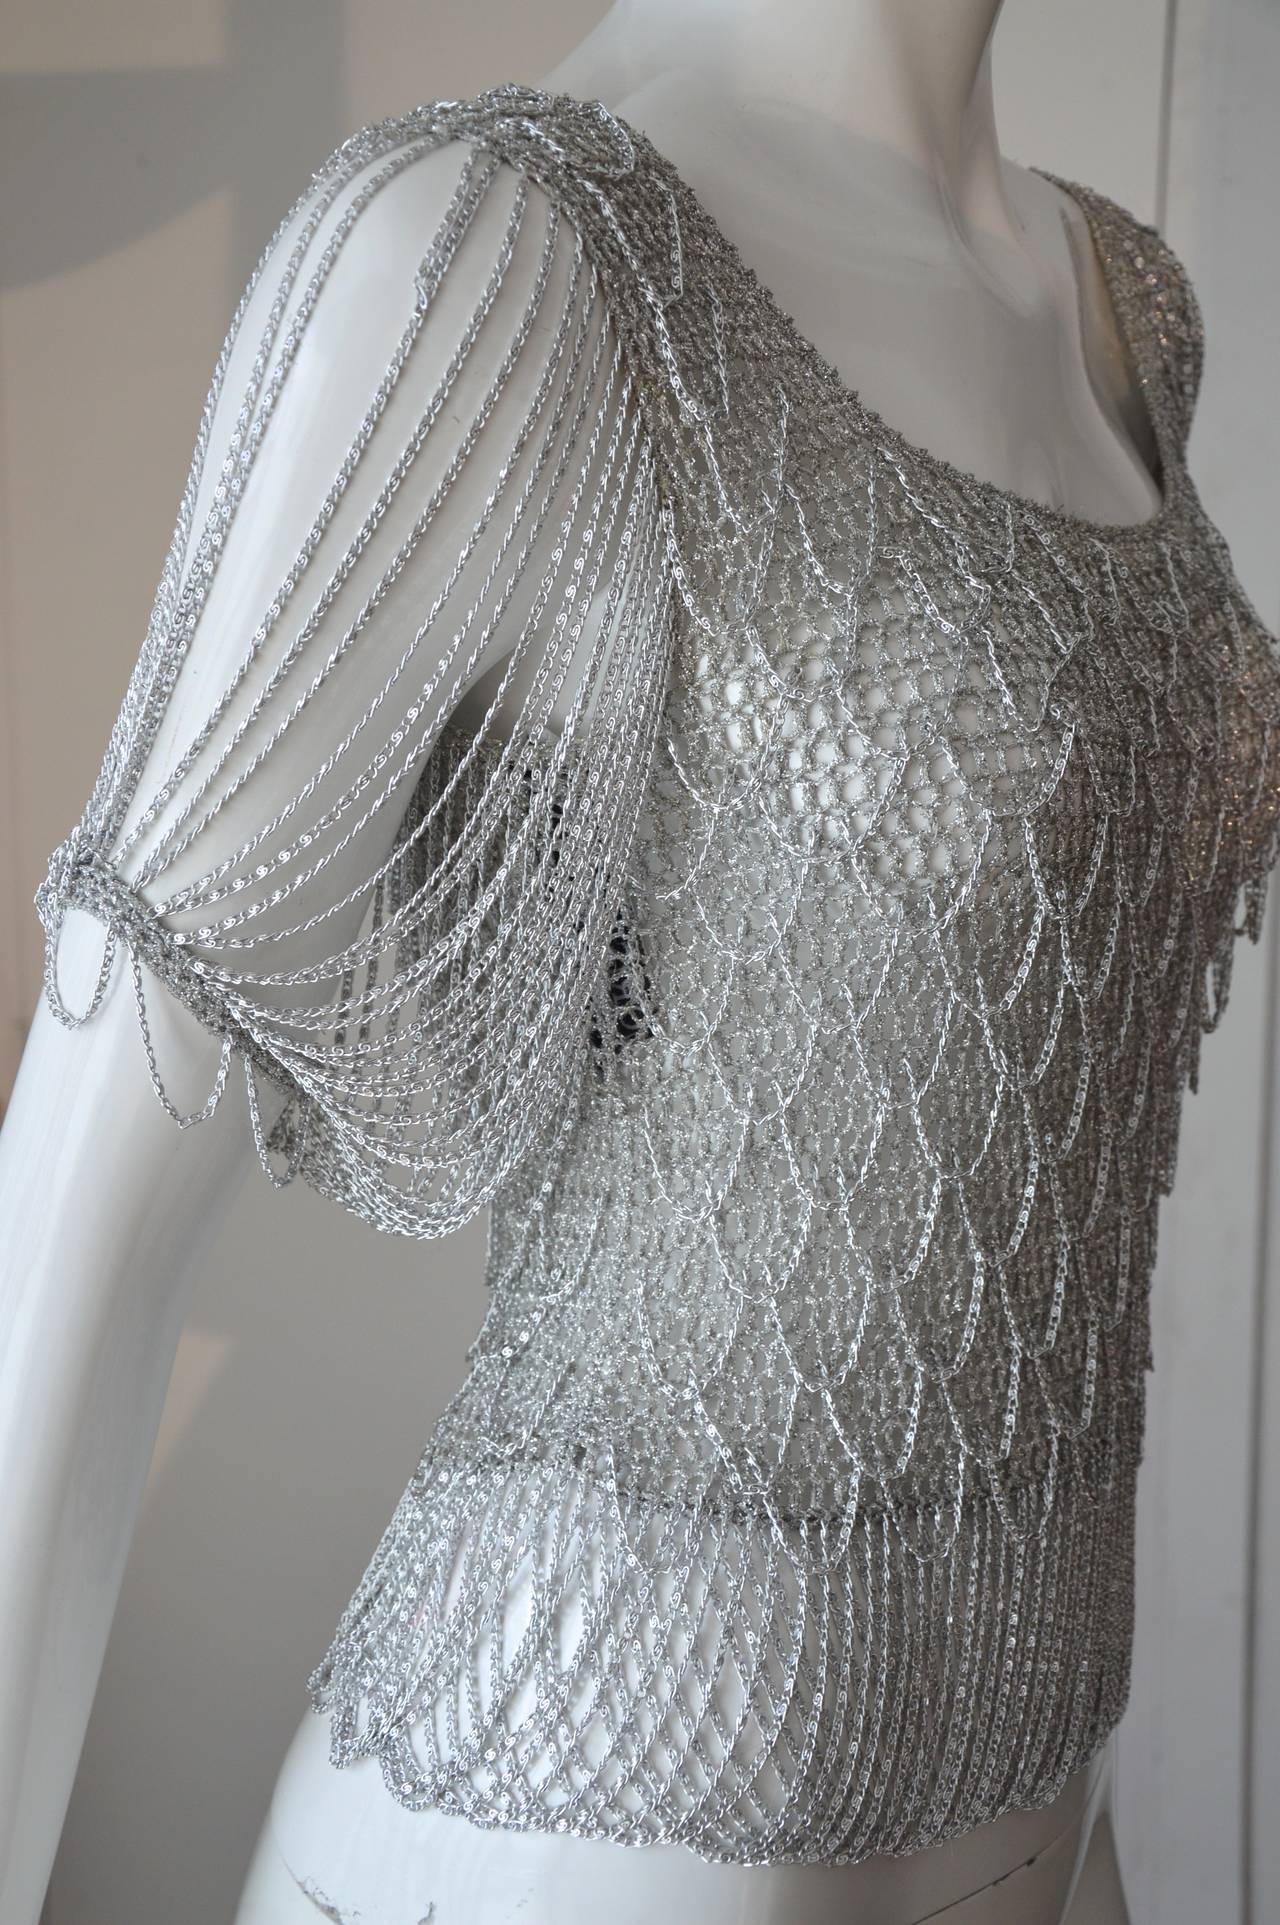 1970s Loris Azzaro top silver crochet knit in metallic silver thread. The bottom of the top has a fringe made with silver chain. The same chain is used over the sweater, the dramatic sleeves feature the same chain mail detail.
Sophisticated top and